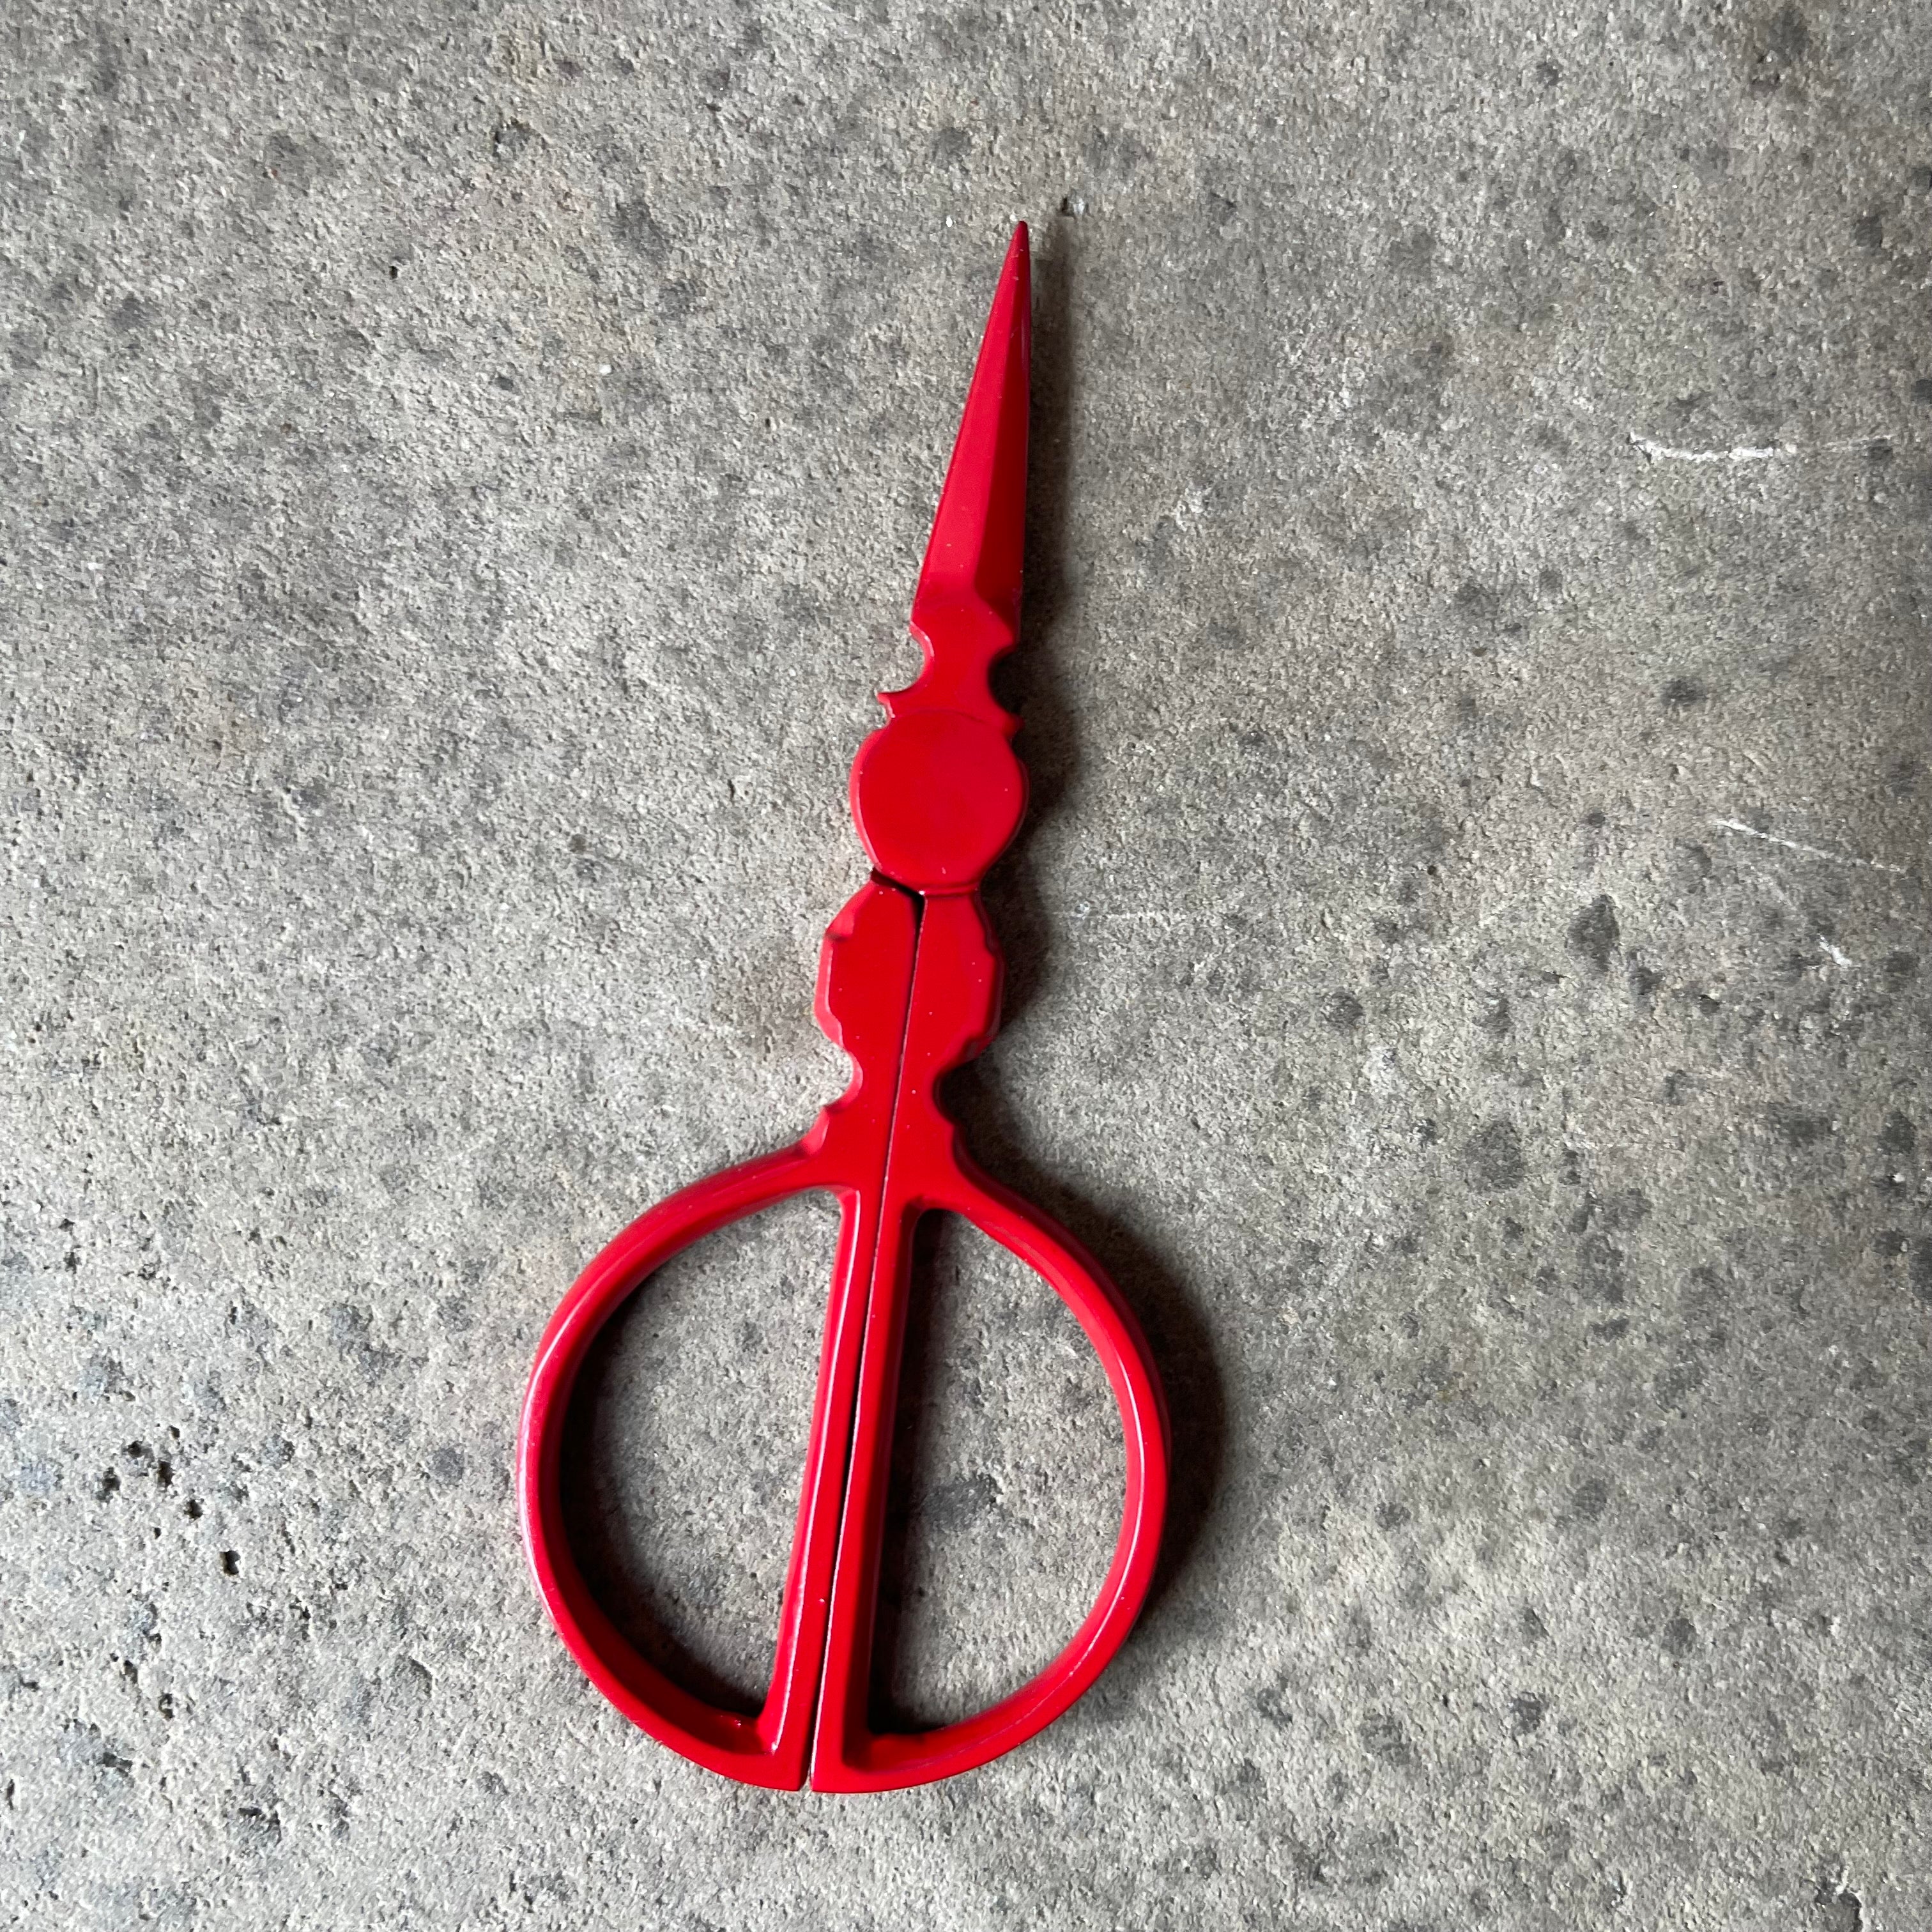 Miniature Roly Poly Scissors, TSA Approved